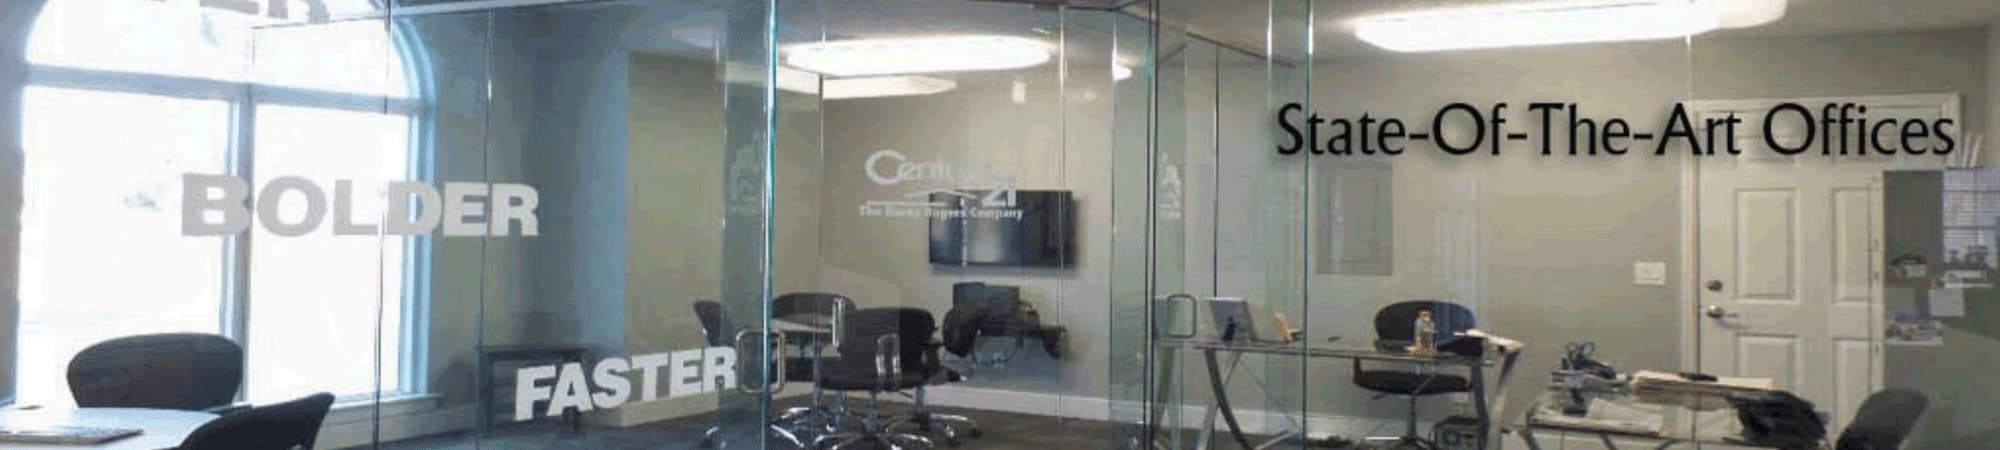 C21 Darby-Rogers in Lake City Florida has state-of-the-art offices